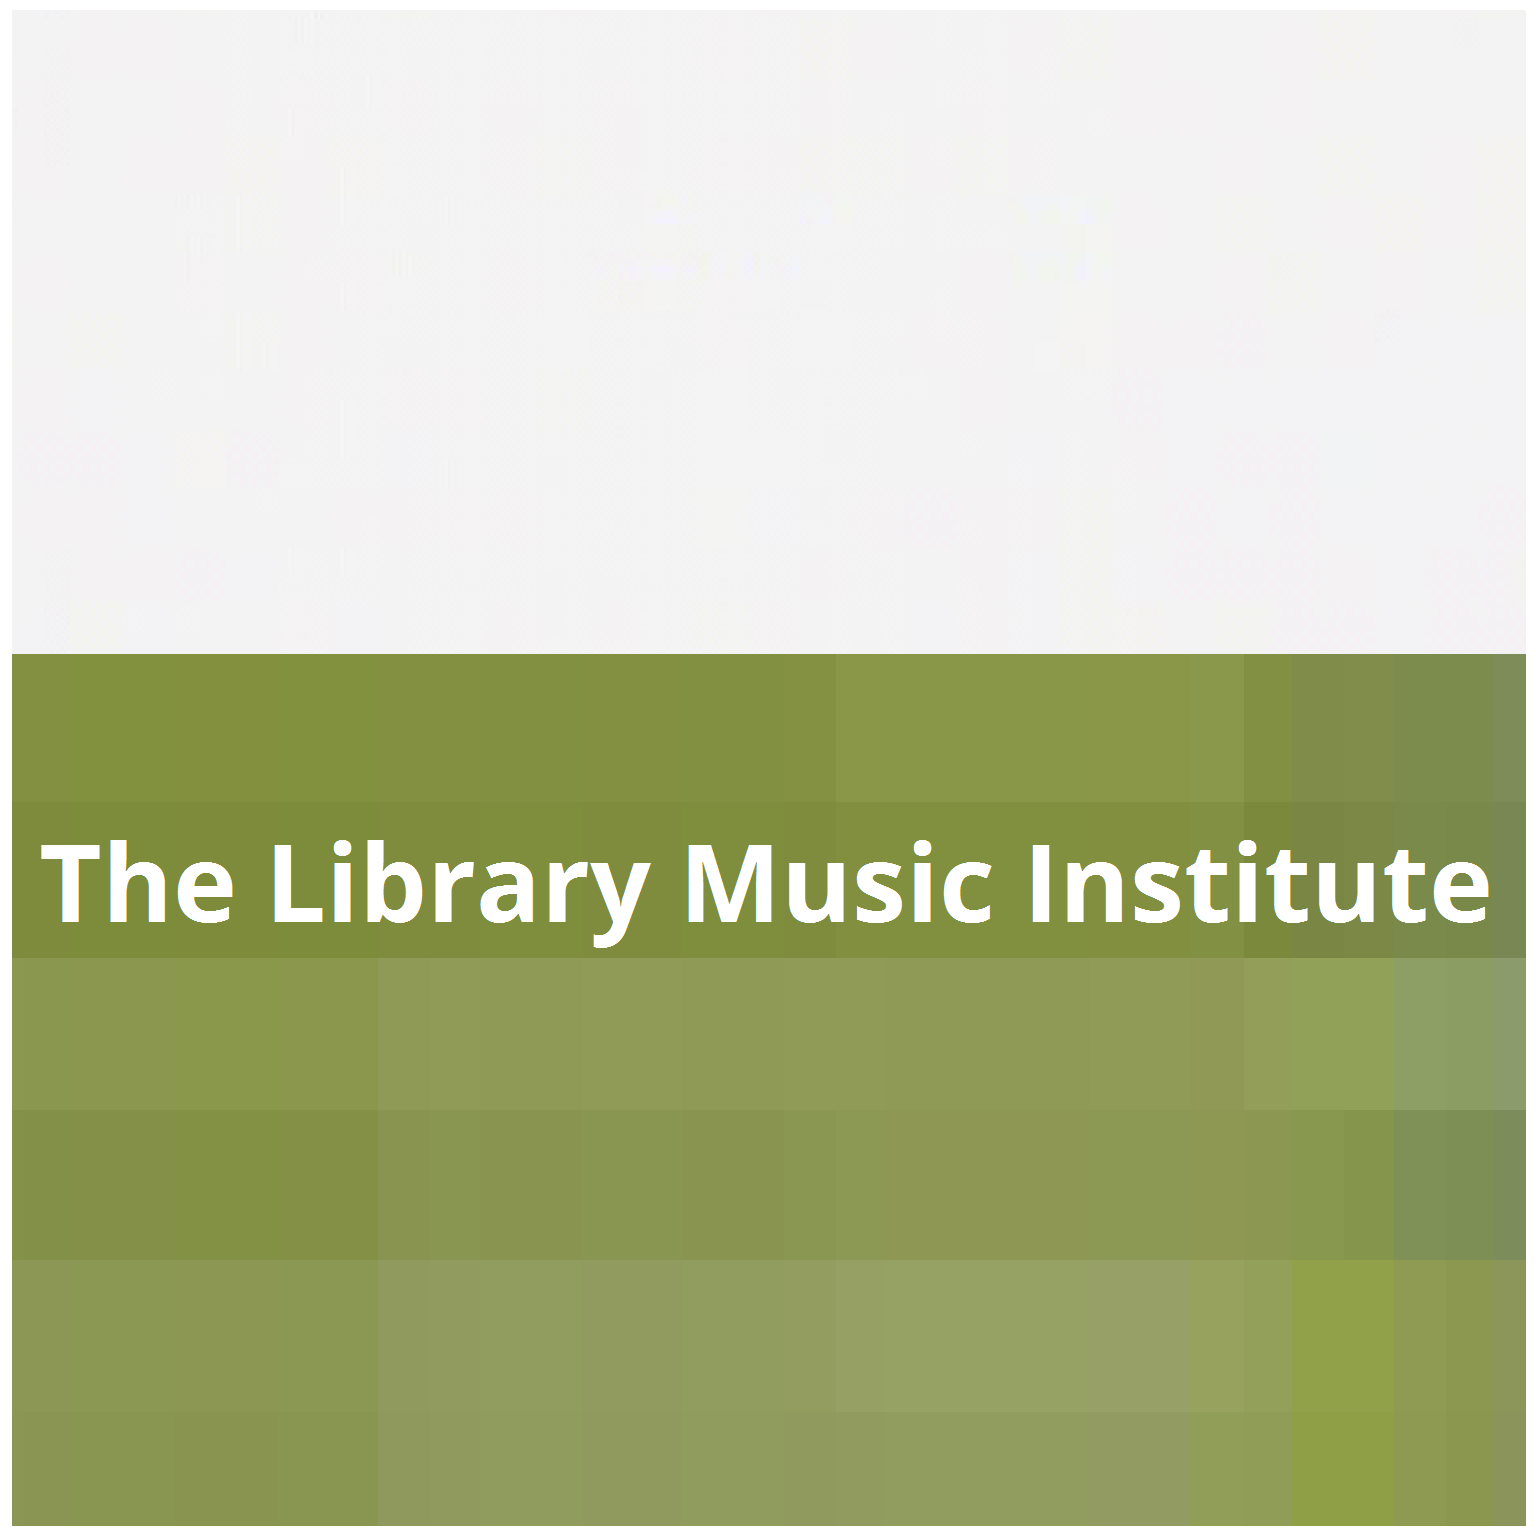 The Library Music Institute